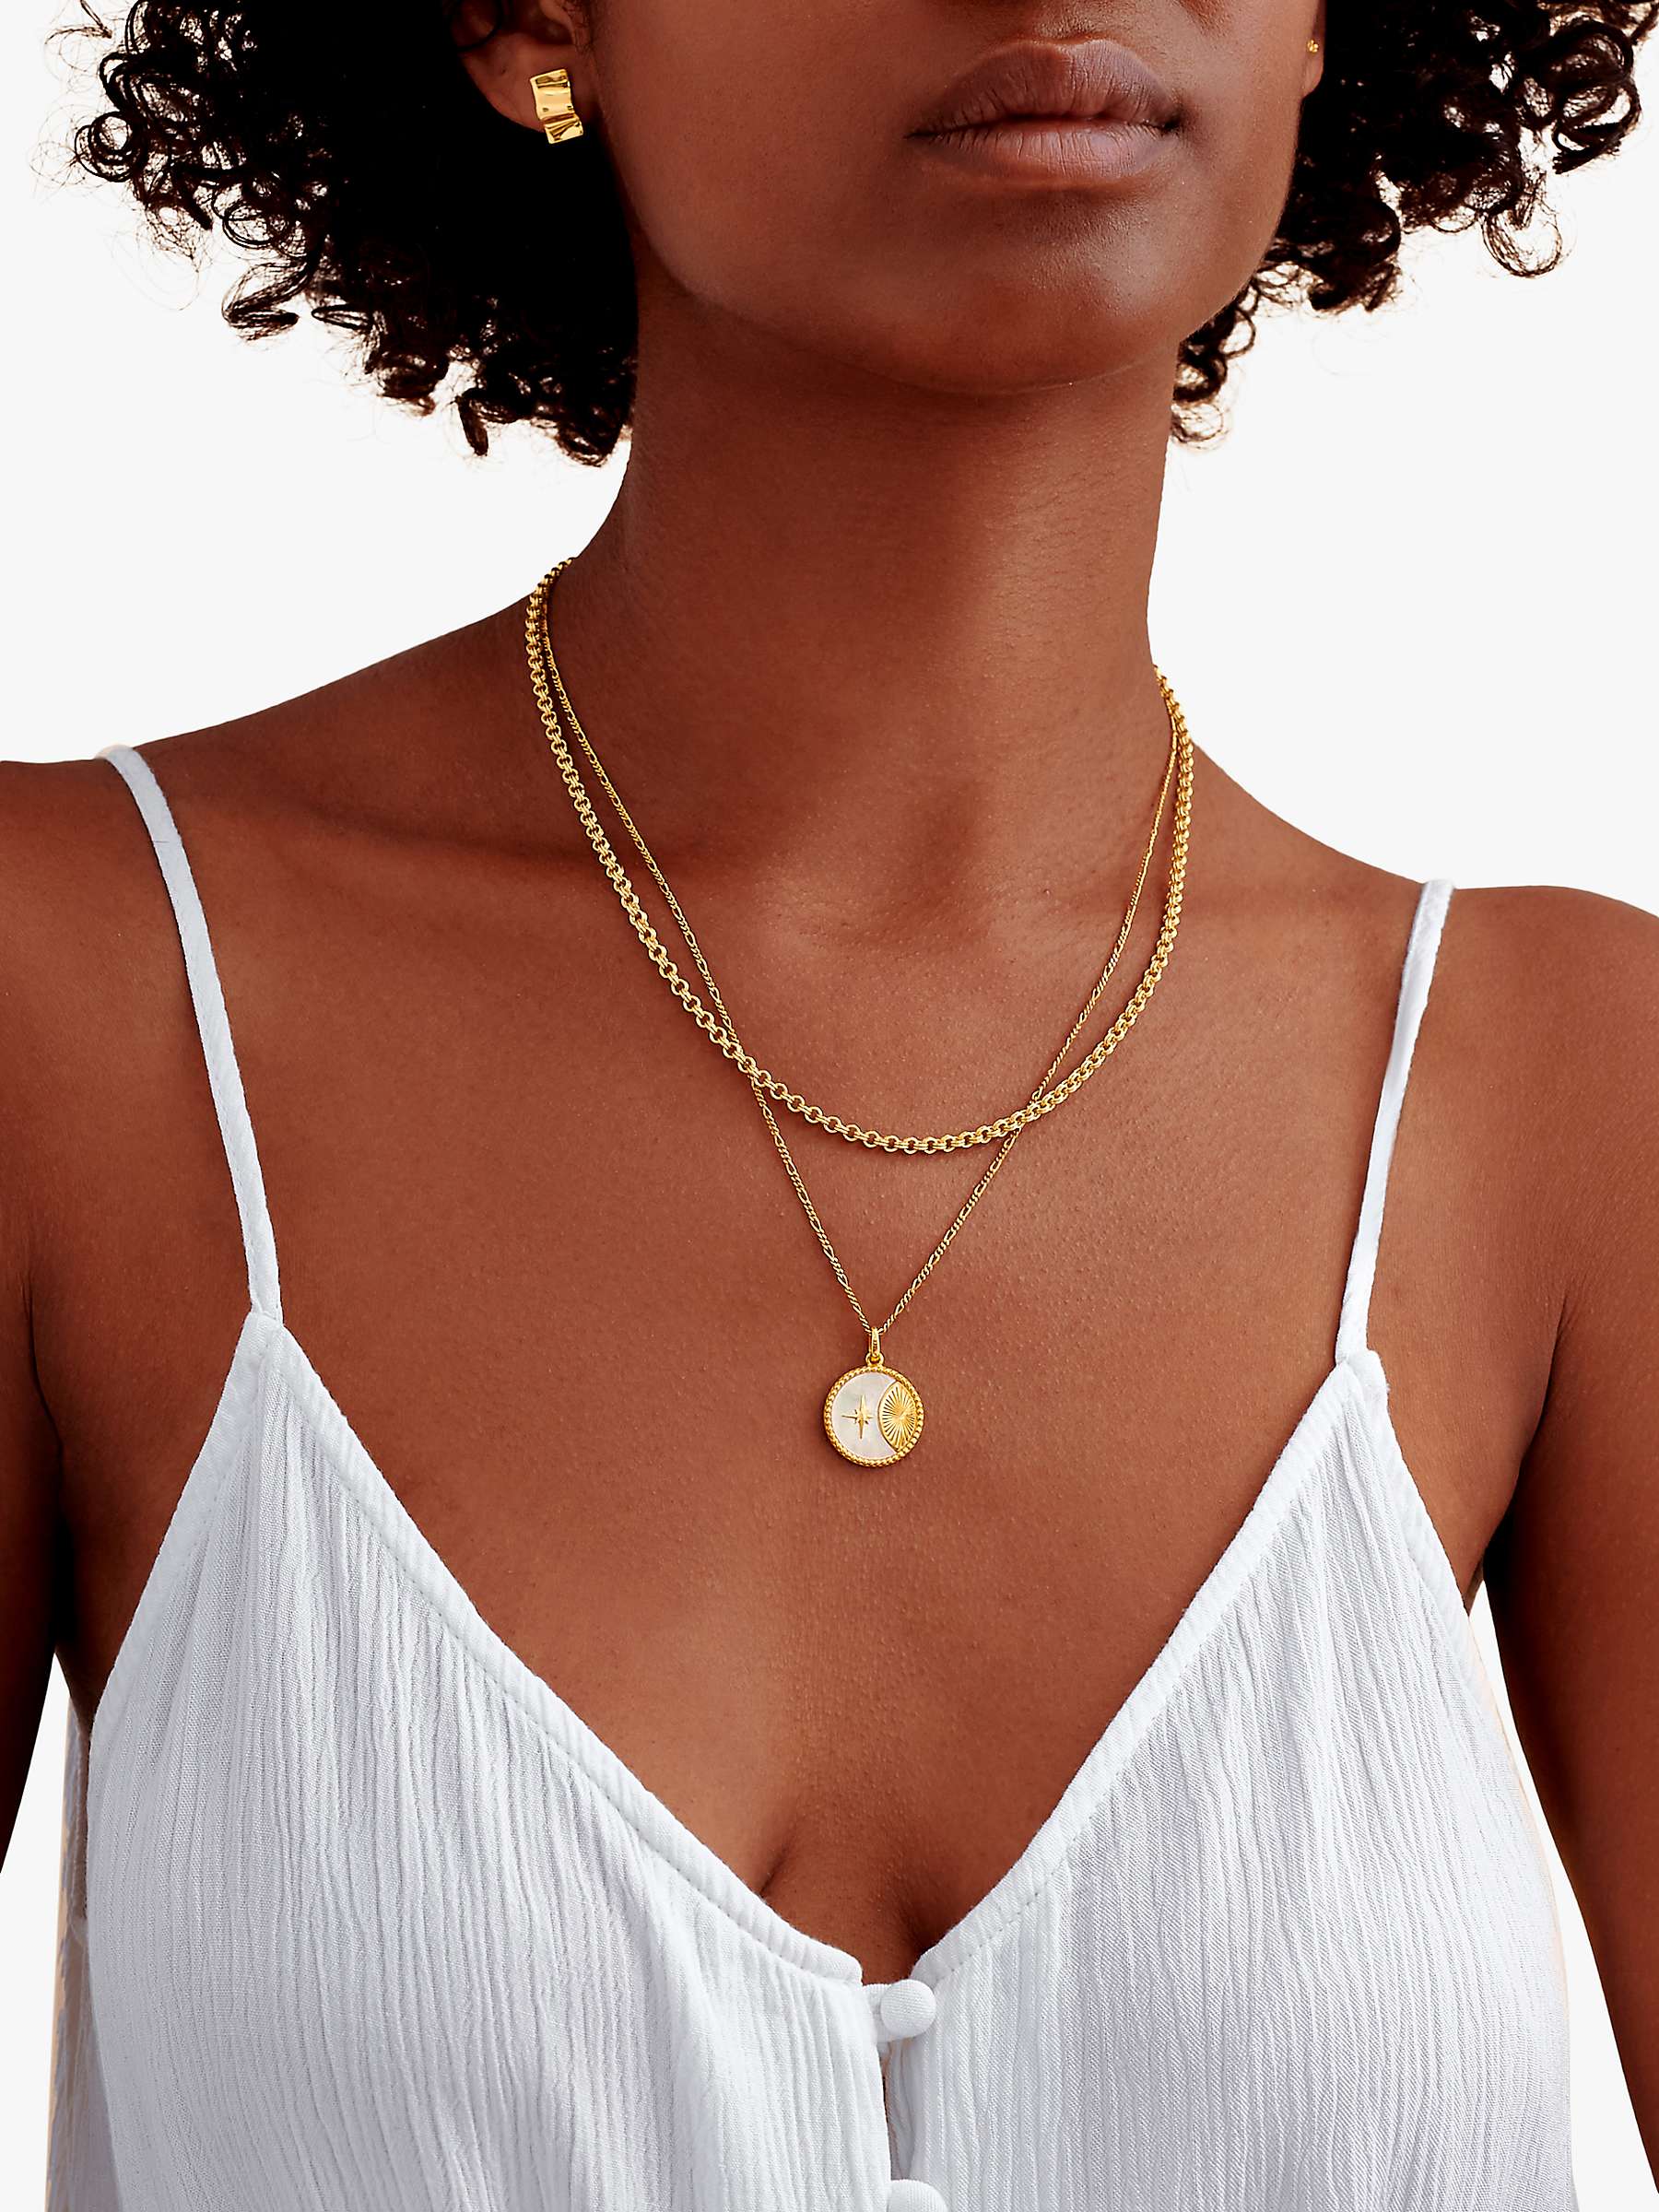 Buy Edge of Ember Solar Mother of Pearl Coin Pendant Necklace Online at johnlewis.com